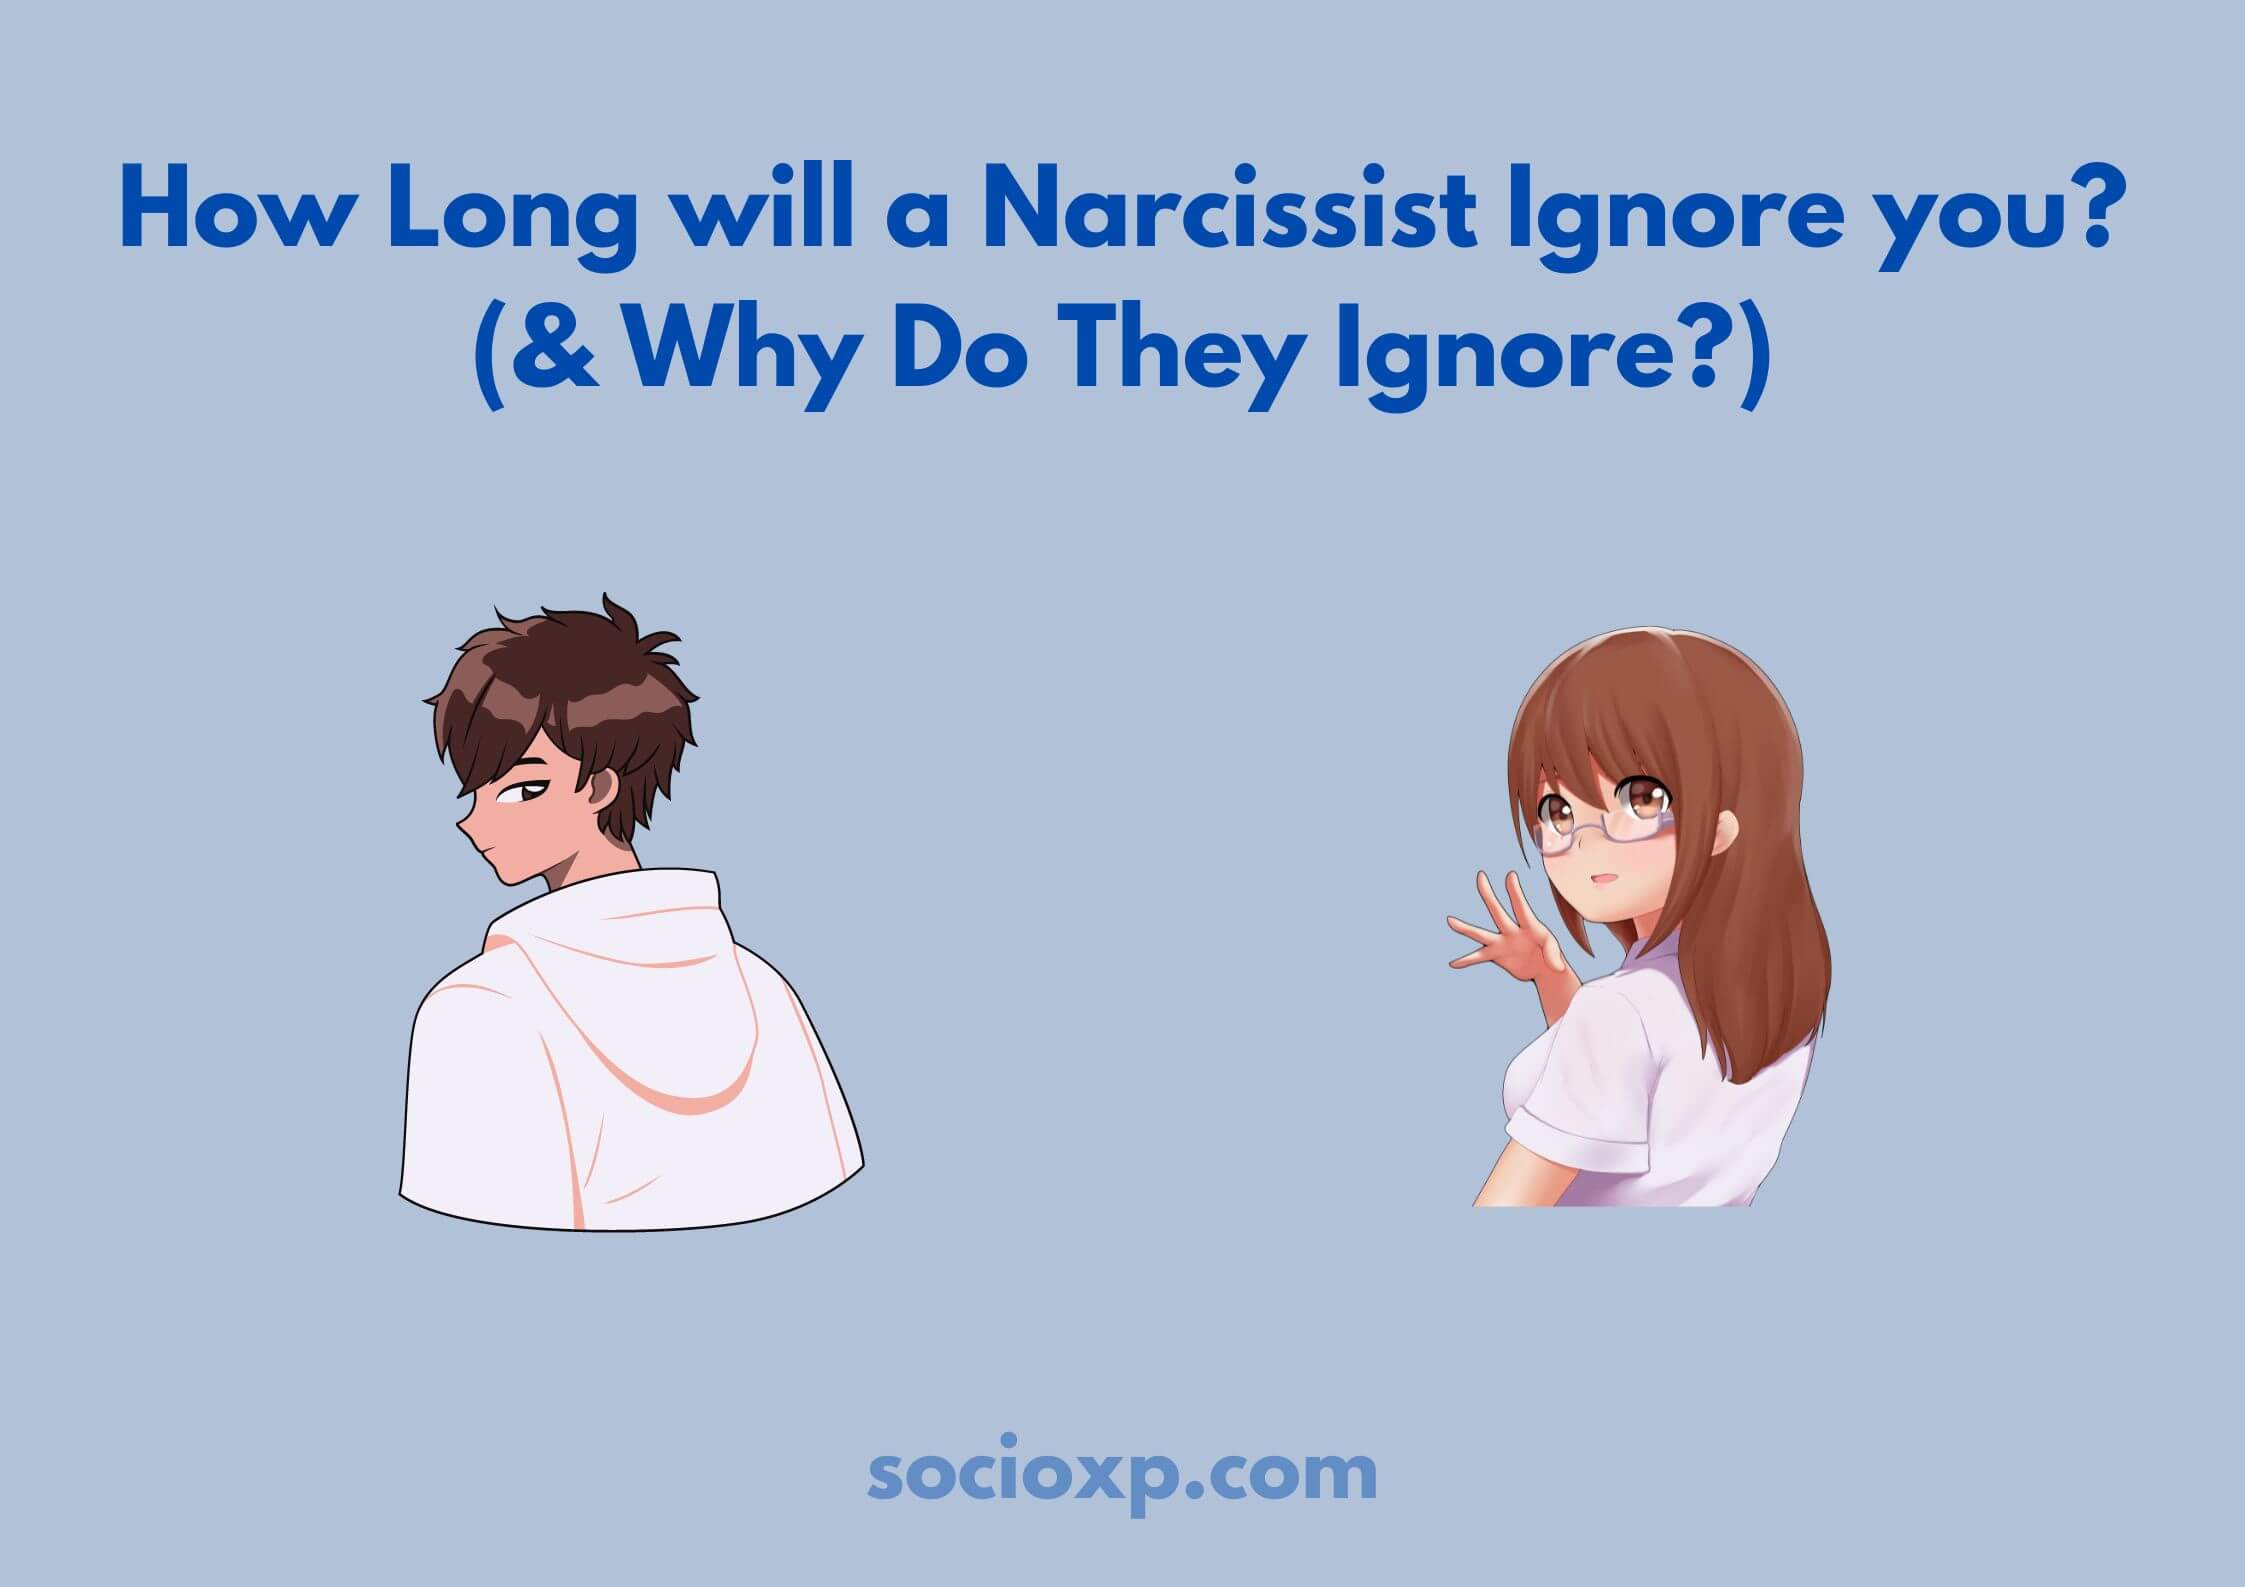 How Long will a Narcissist Ignore you? (& Why Do They Ignore?)